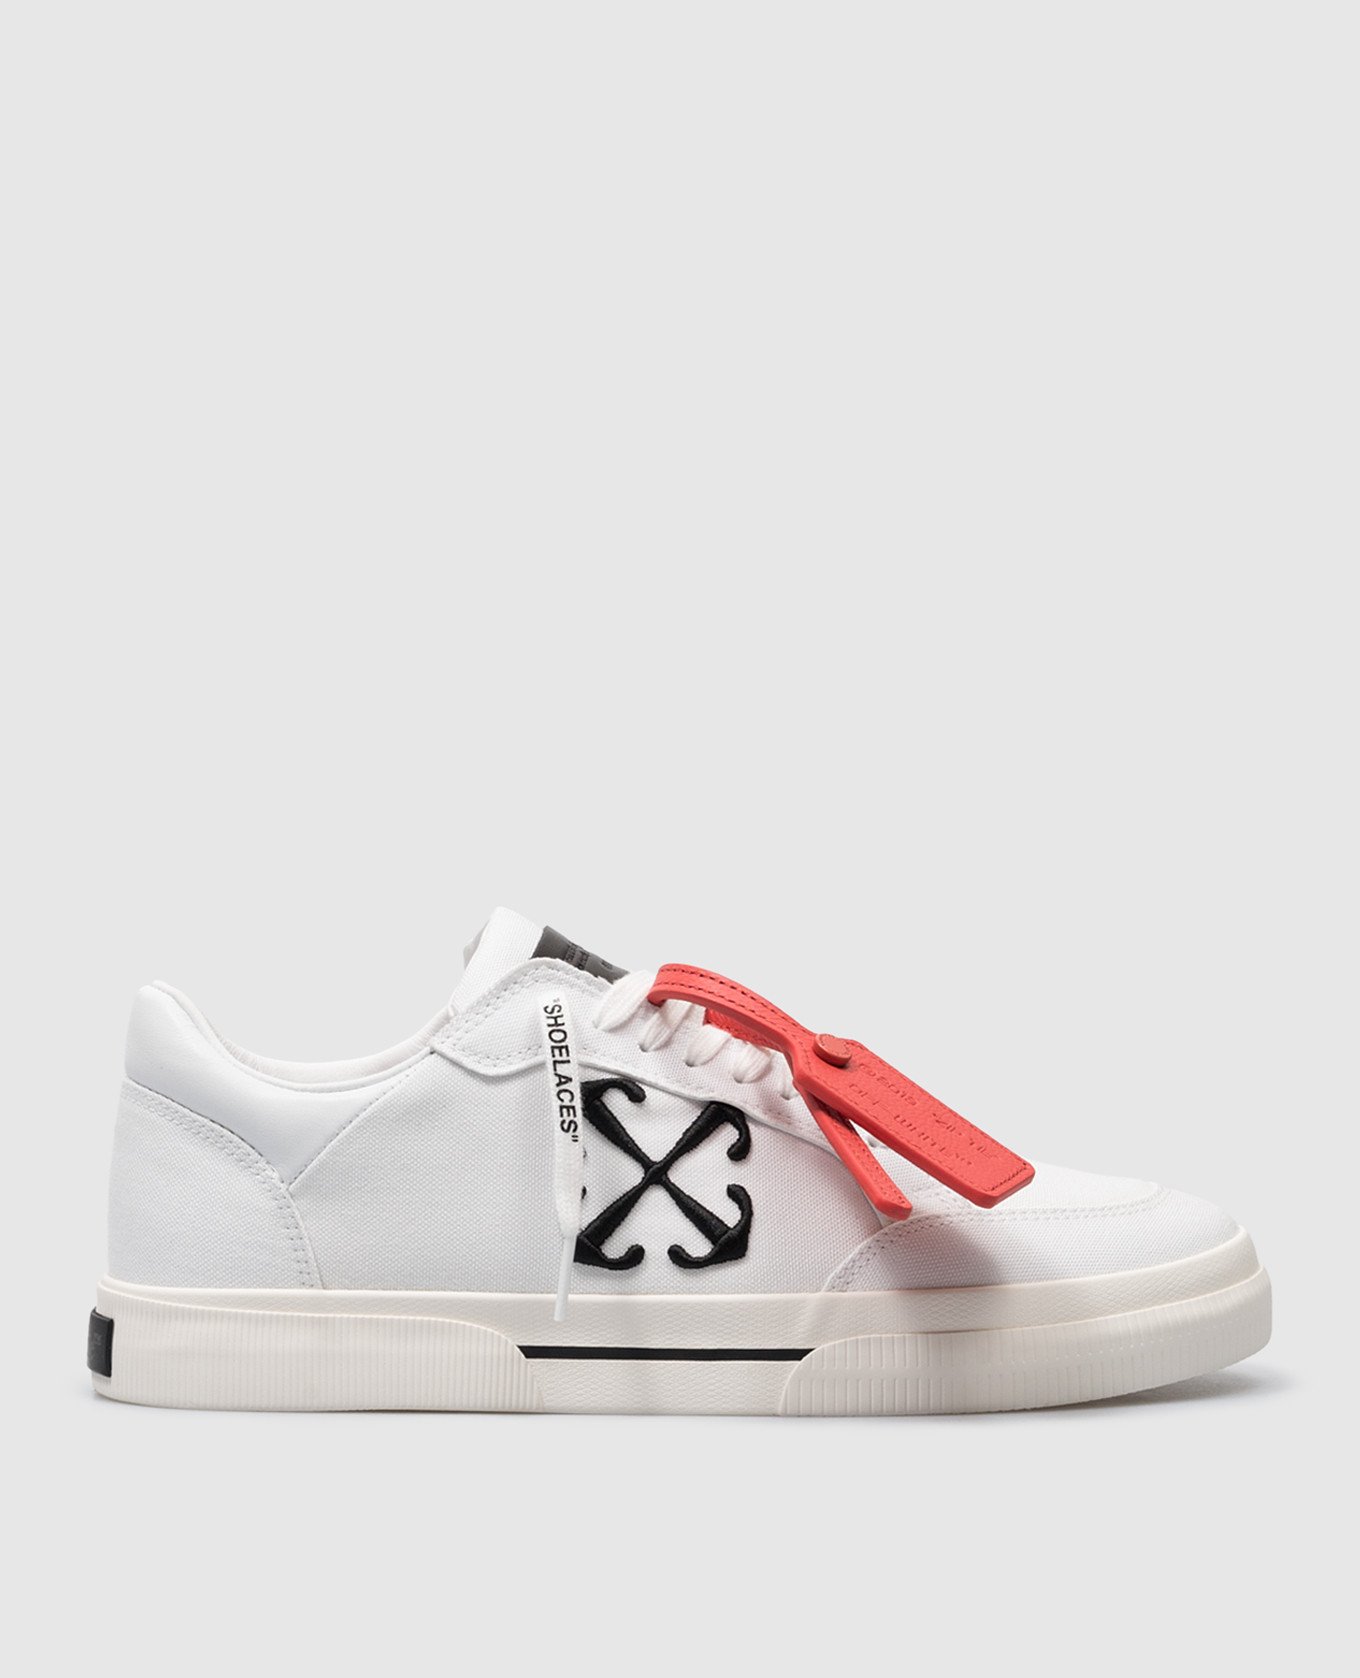 White sneakers with Arrow logo embroidery